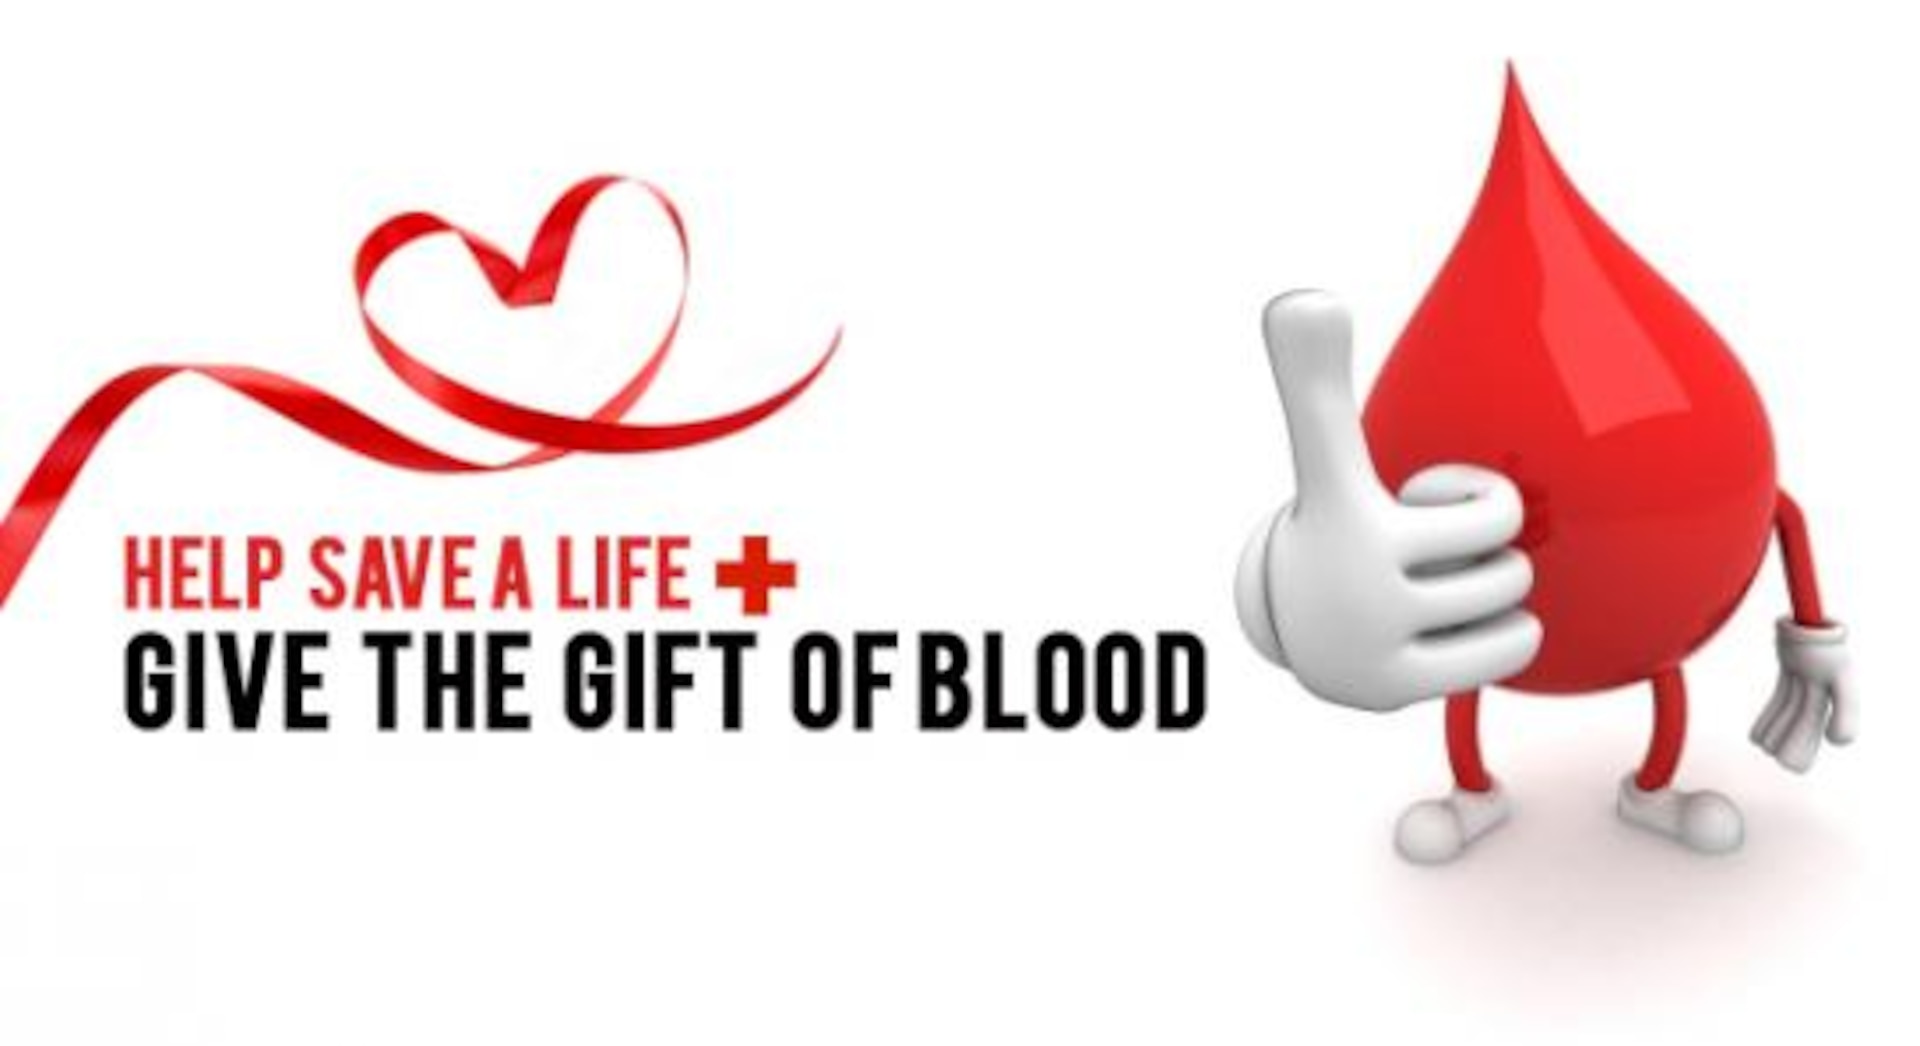 Blood donations often decline during the holidays when busy schedules, holiday travel and seasonal illnesses can make it more difficult for donors to make and keep blood donation appointment. But the need for blood doesn't get a break for the holiday season.